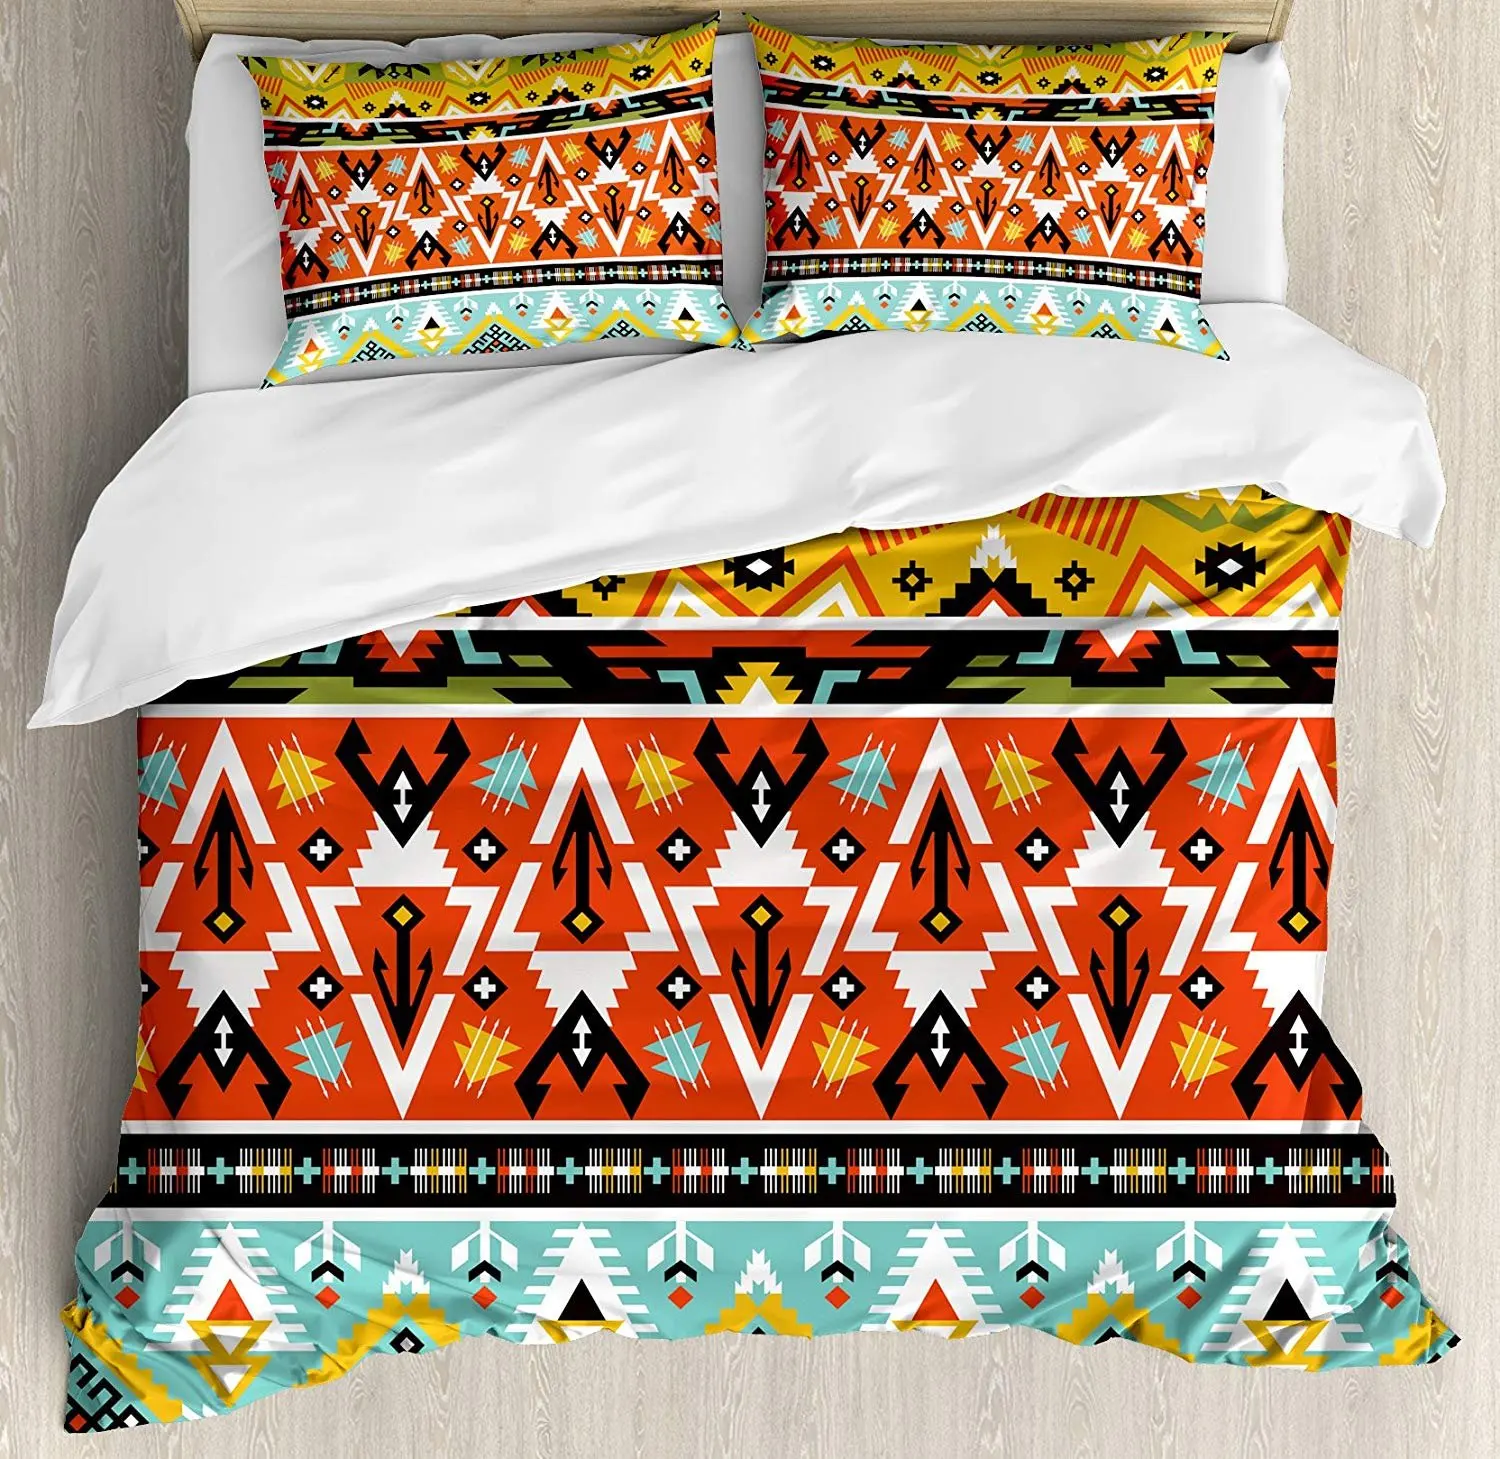 

Tribal Bedding Set Love and Adventure Abstract Mountains Pattern with Aztec Ethnic Art Print Duvet Cover Set Pillowcase for Home